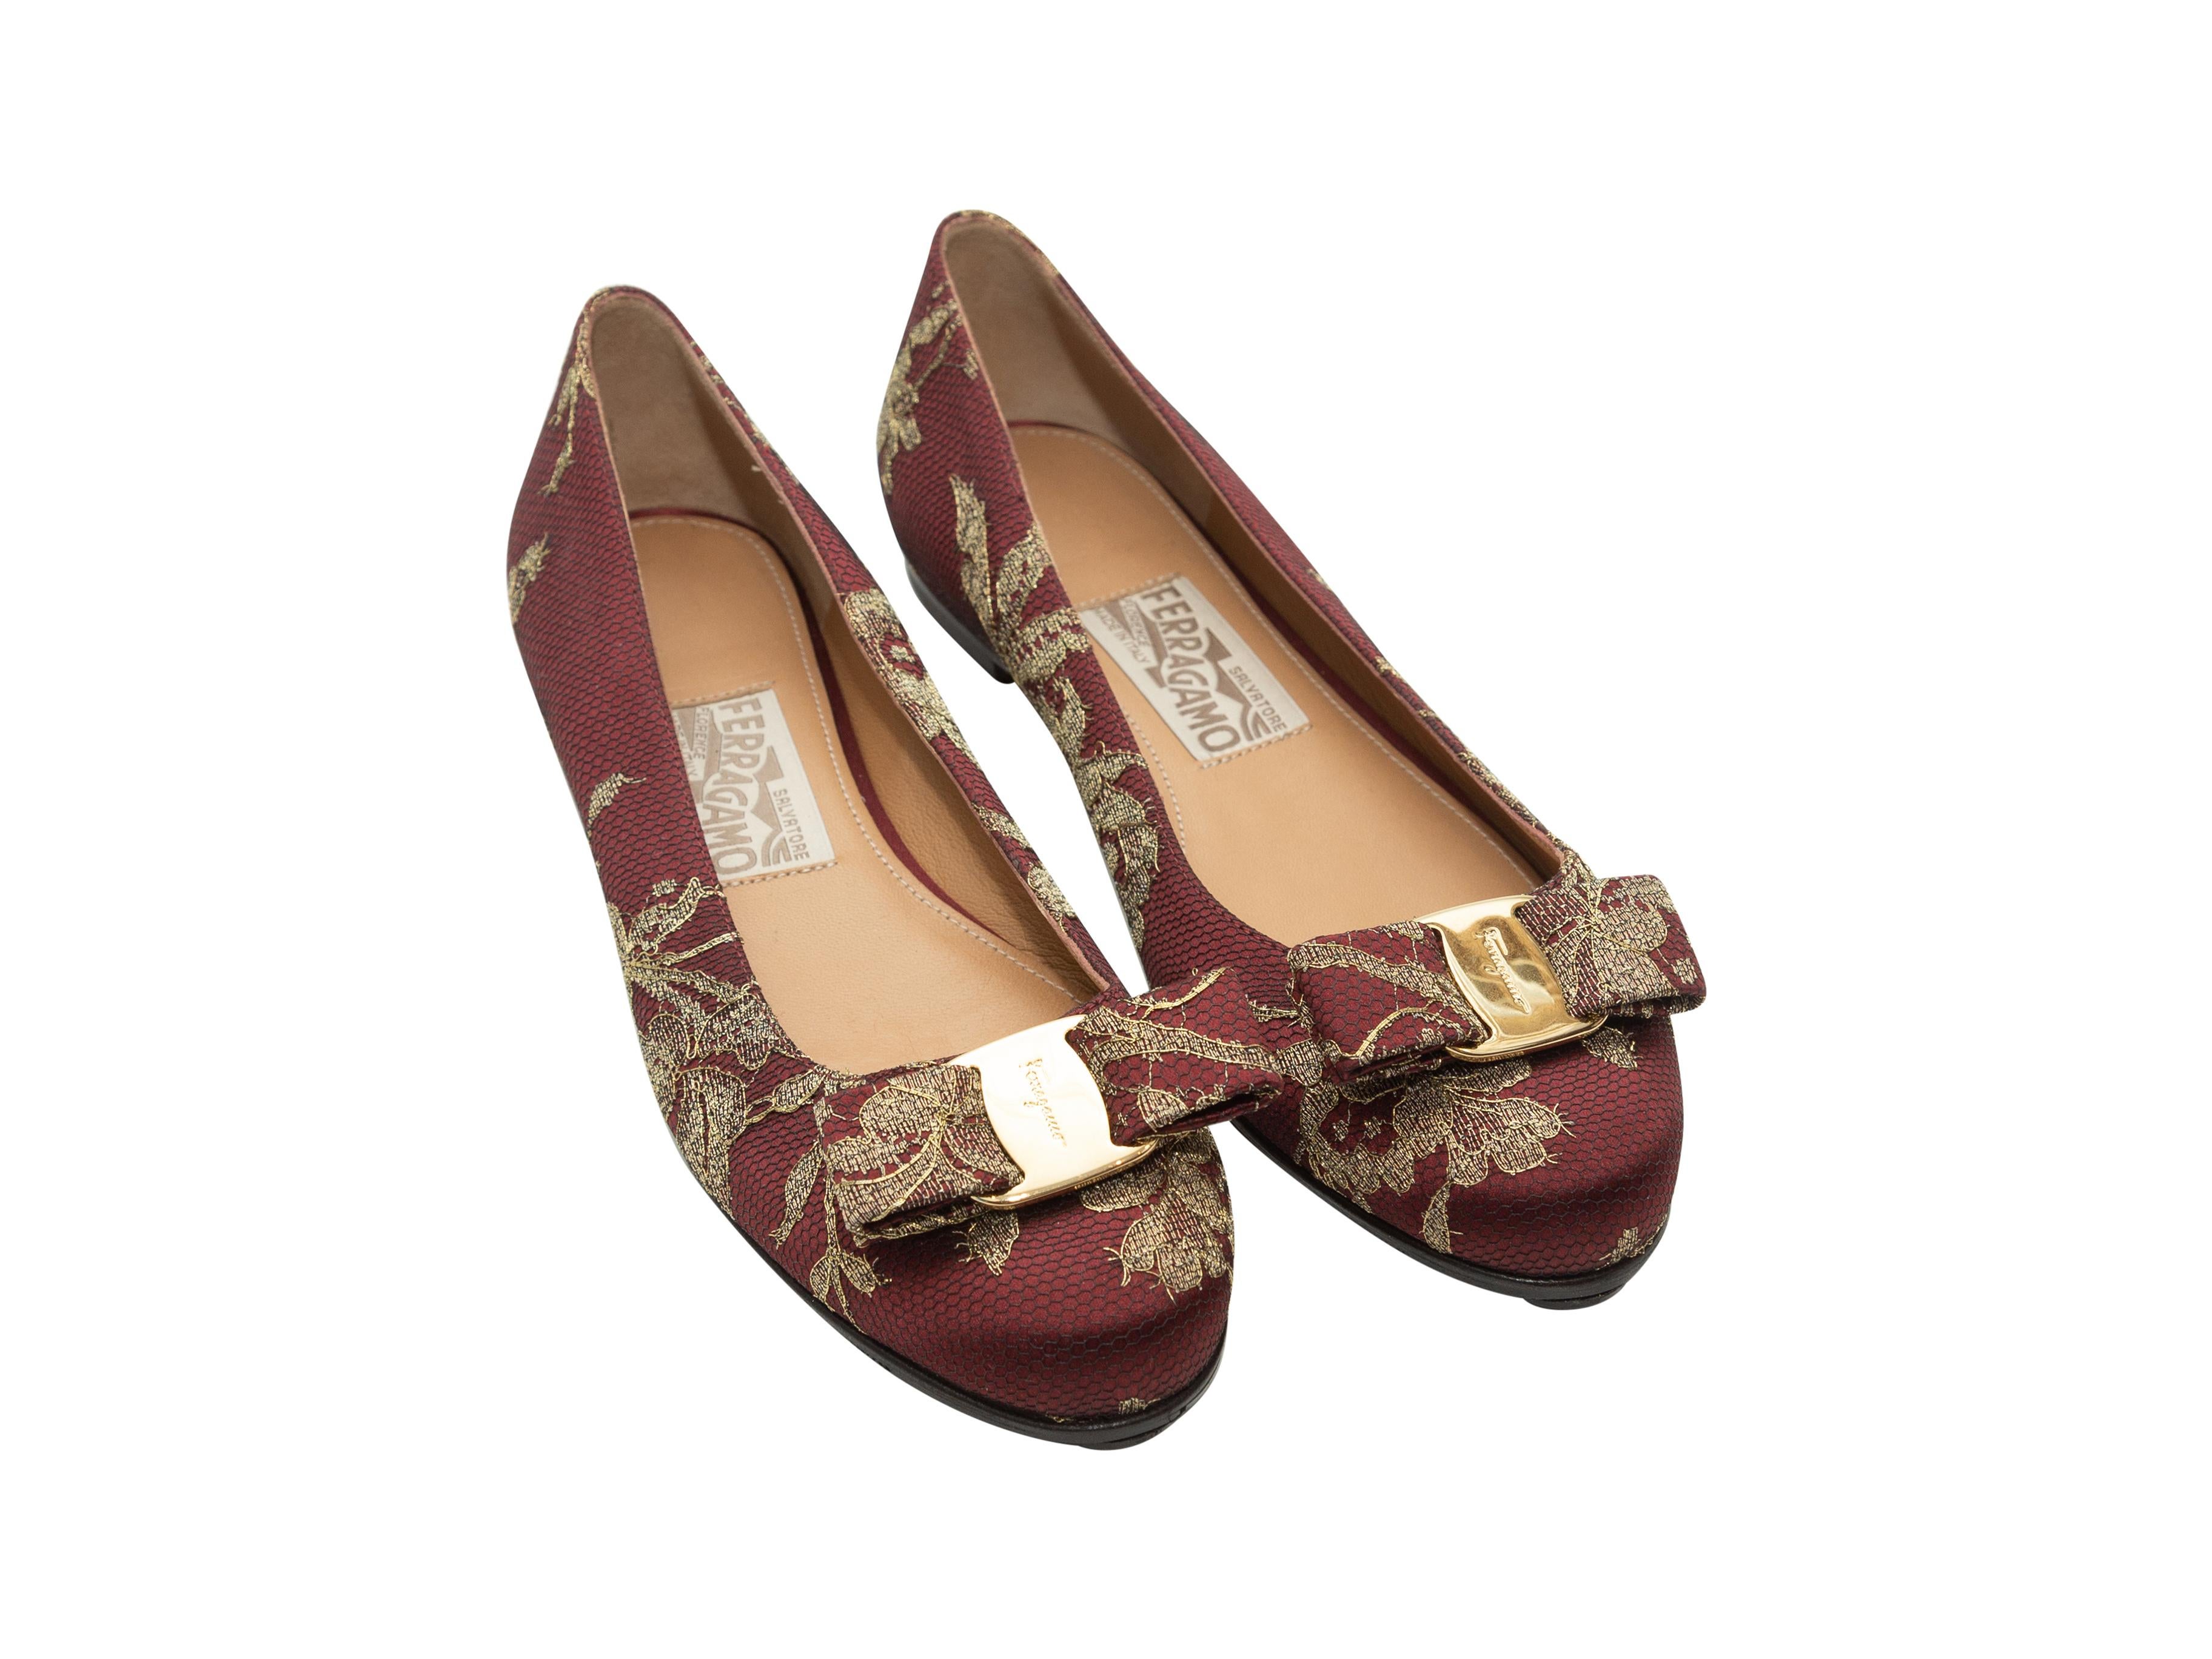 Product details: Vintage burgundy and gold satin and lace Varina ballet flats by Salvatore Ferragamo. Bow accents at tops. 
Condition: Pre-owned. Very good. Resoled.
Est. Retail $ 895.00